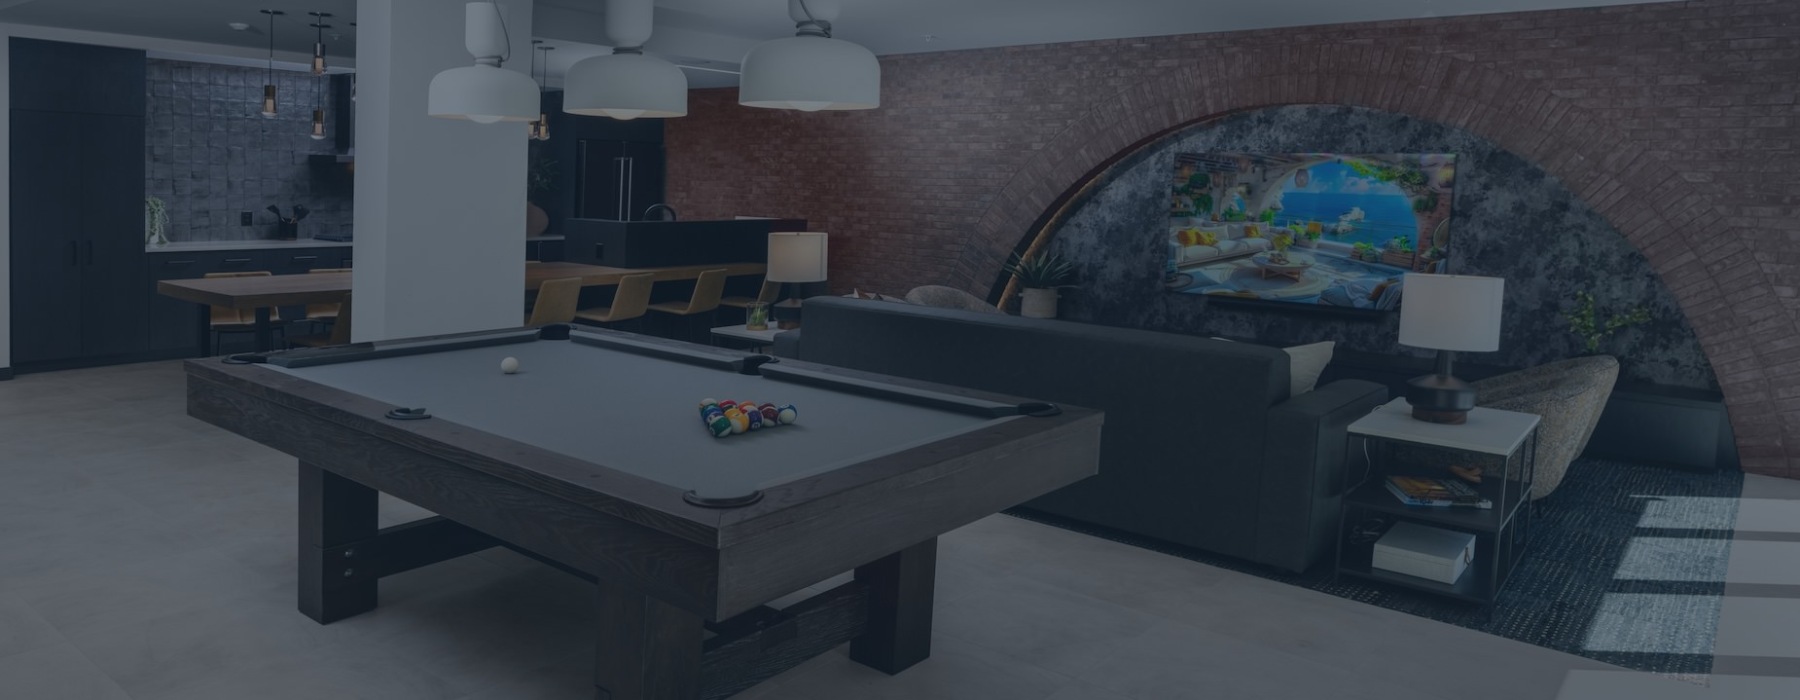 a clubroom with pool table, seating, and TV